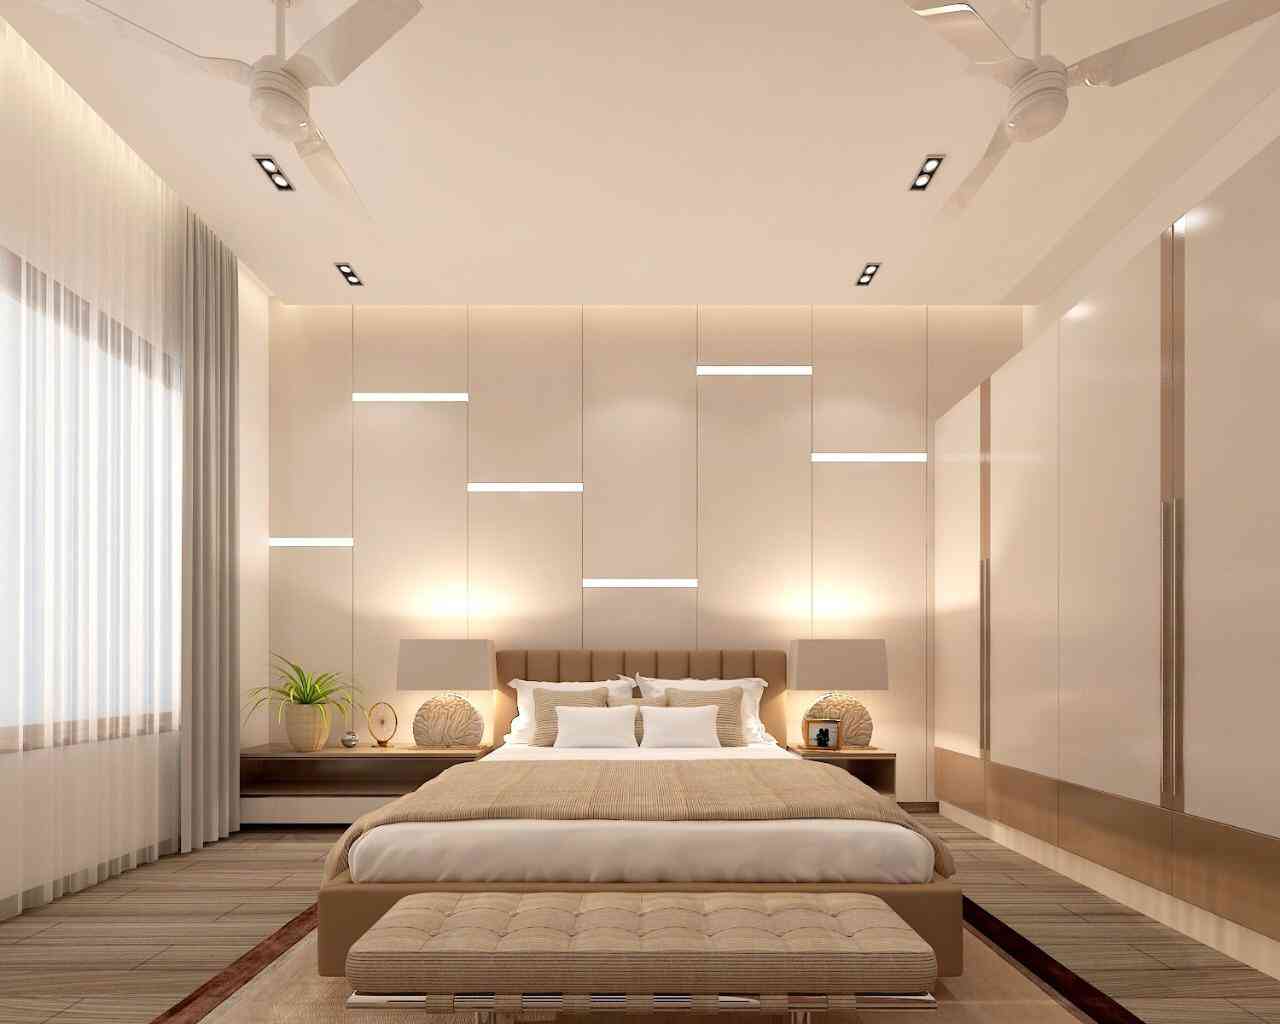 Modern Bedroom With Wall Paneling And LED Stripe Light